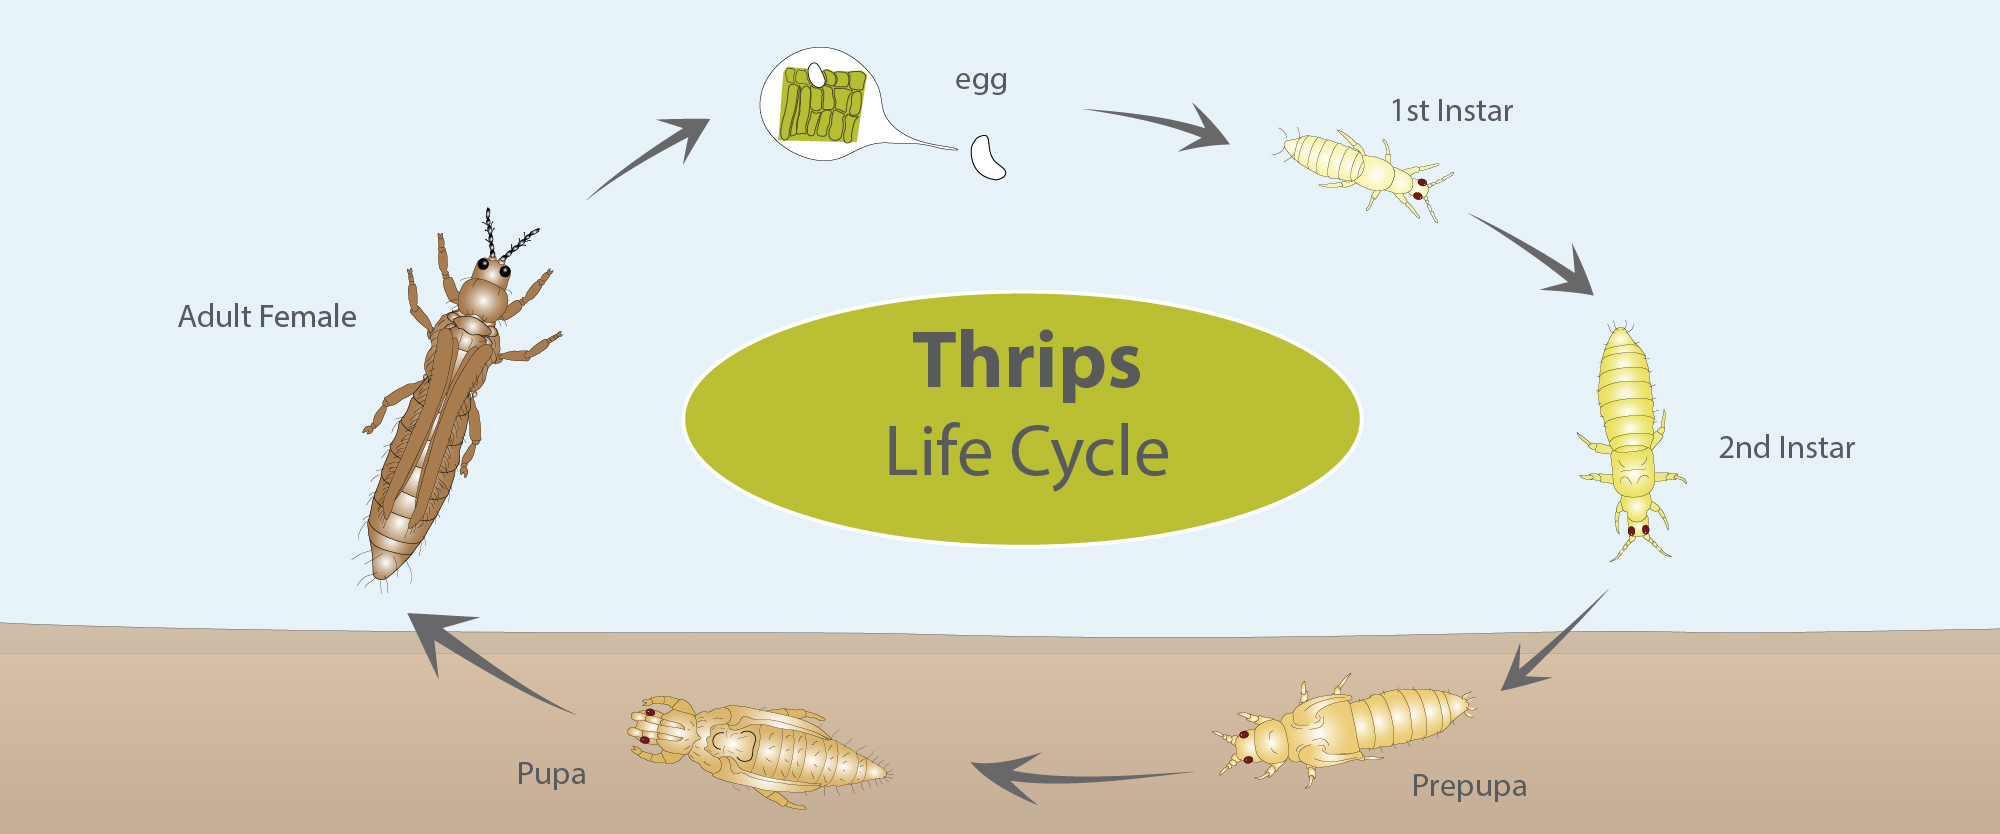 Thrips - Integrated Pest Management